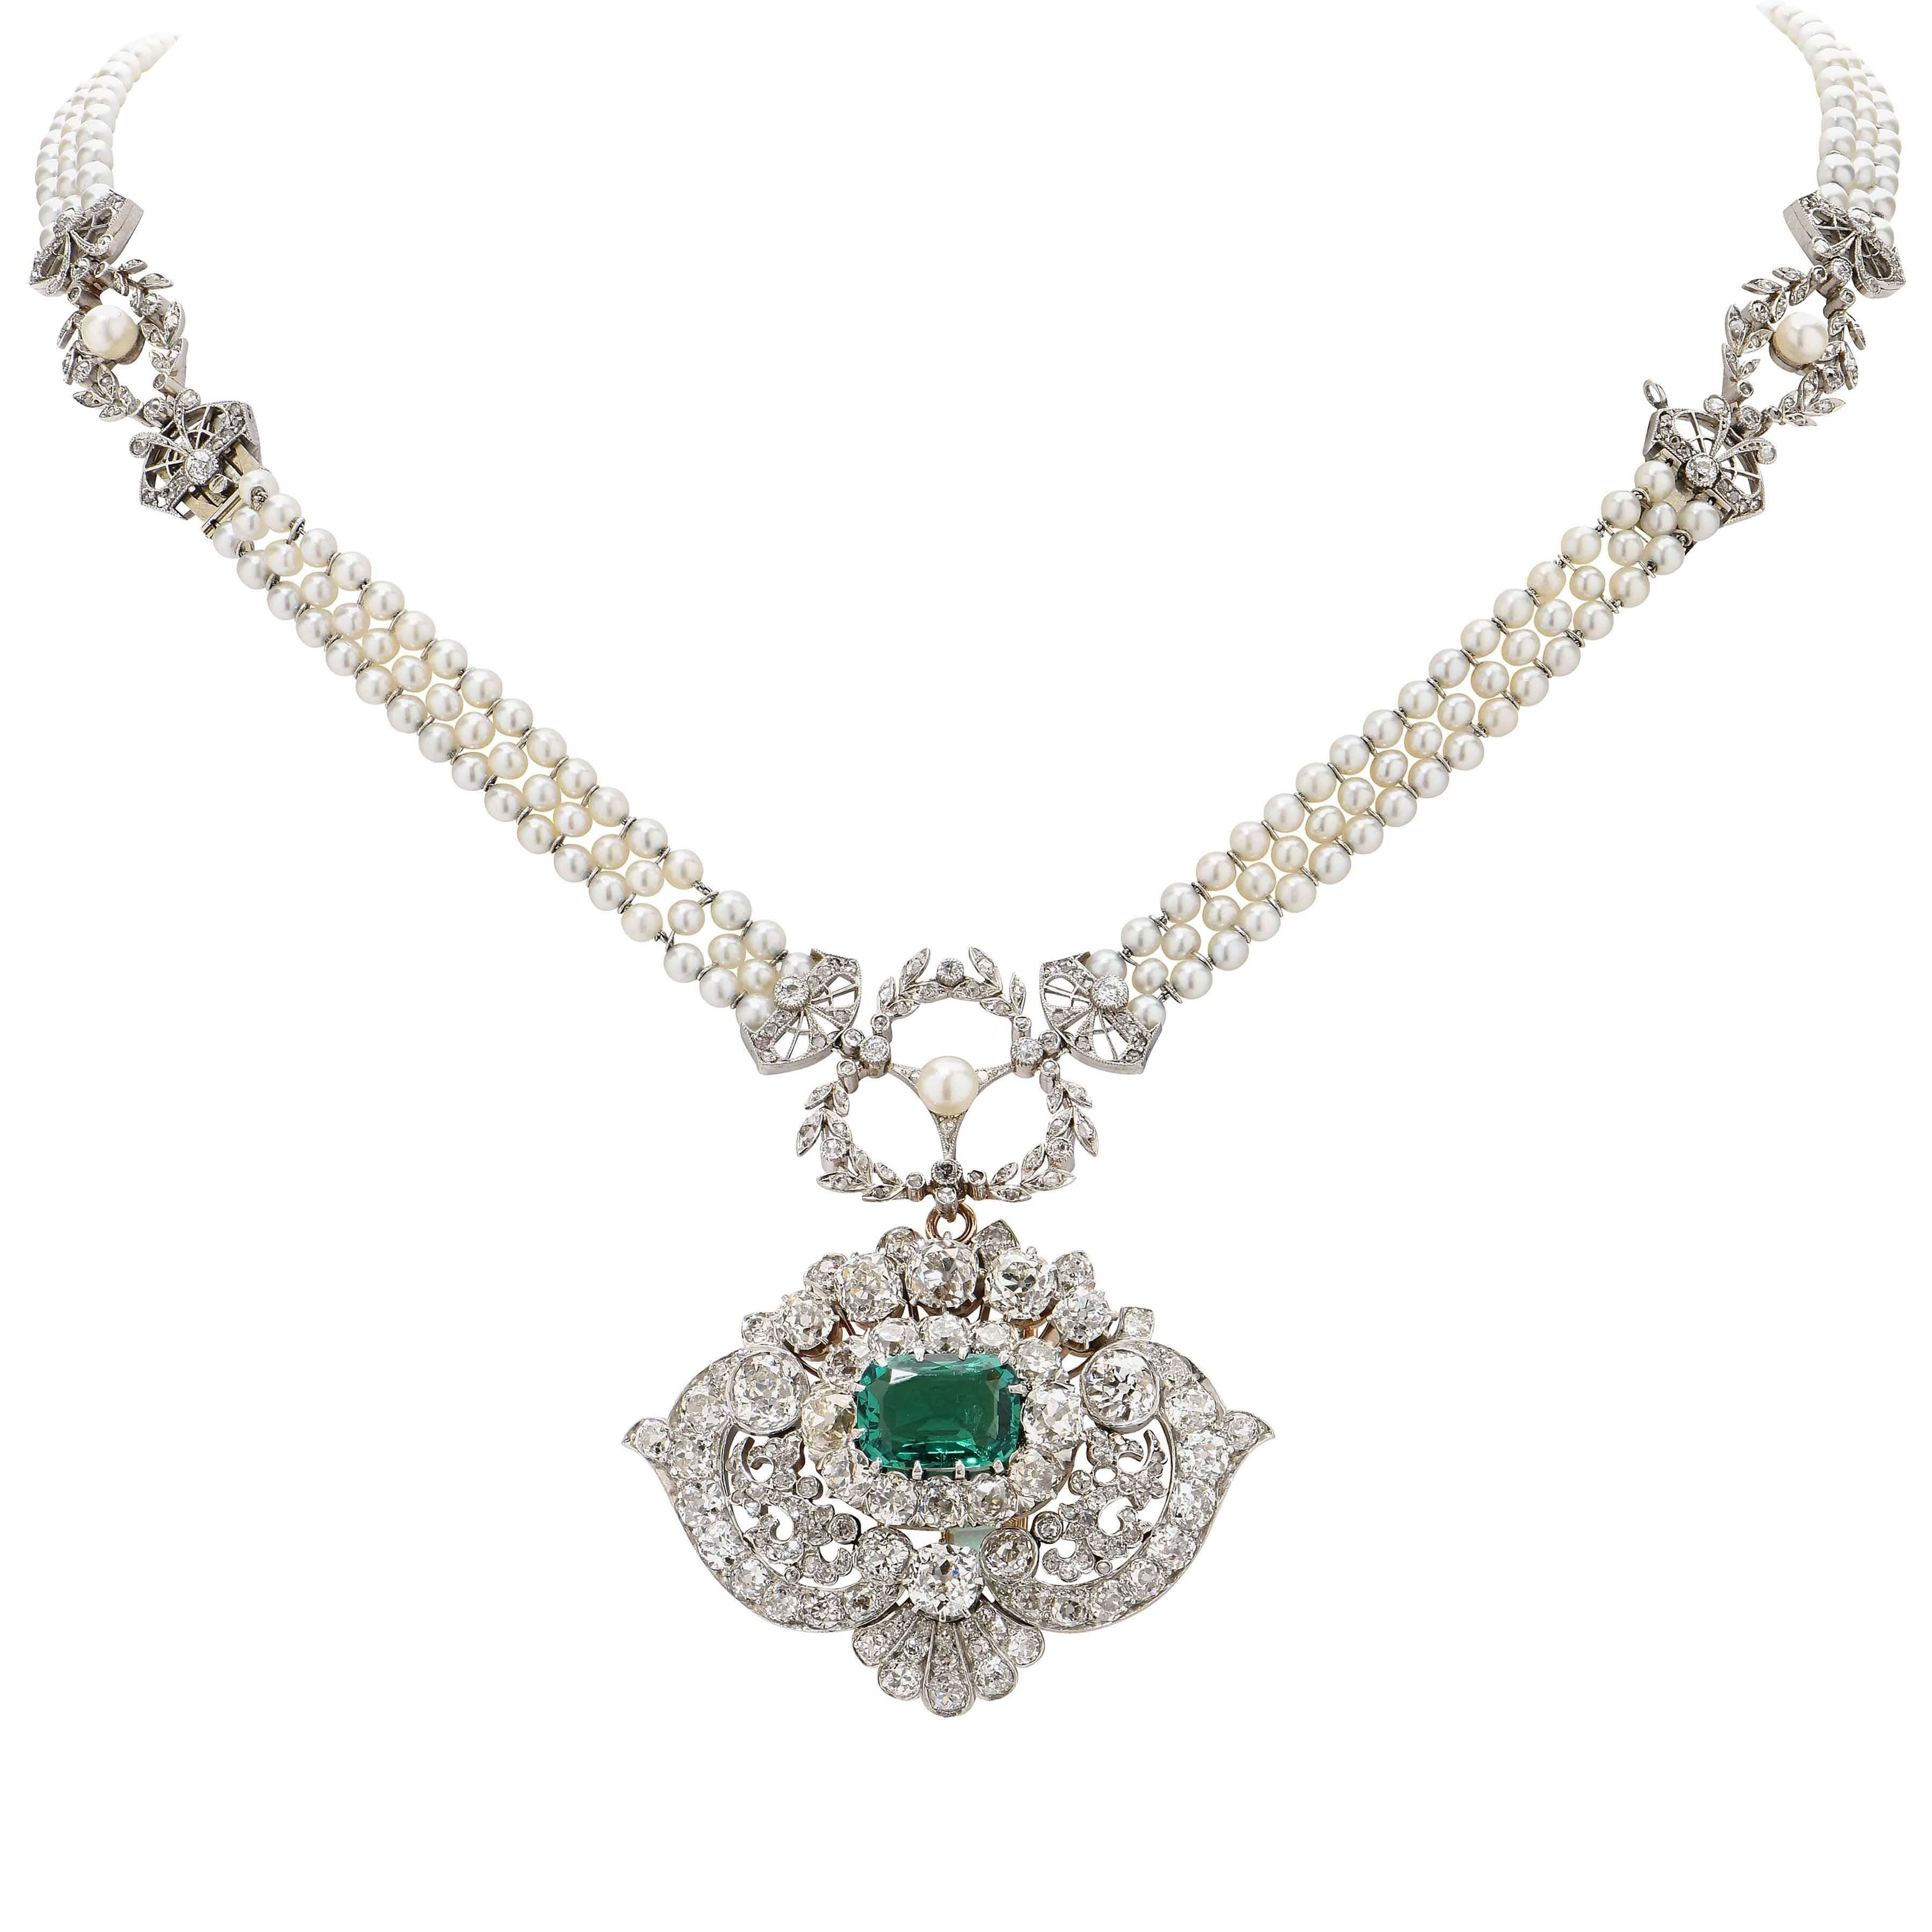 Signed Tiffany & Co. This Scroll Motif  Emerald & Diamond Pendant contains a rare AGL Graded 2.85 Carat CLASSIC COLOMBIA Emerald surrounded by approximately 11.8 carats of old mine cut diamonds set in platinum. The pendant is estimated as being